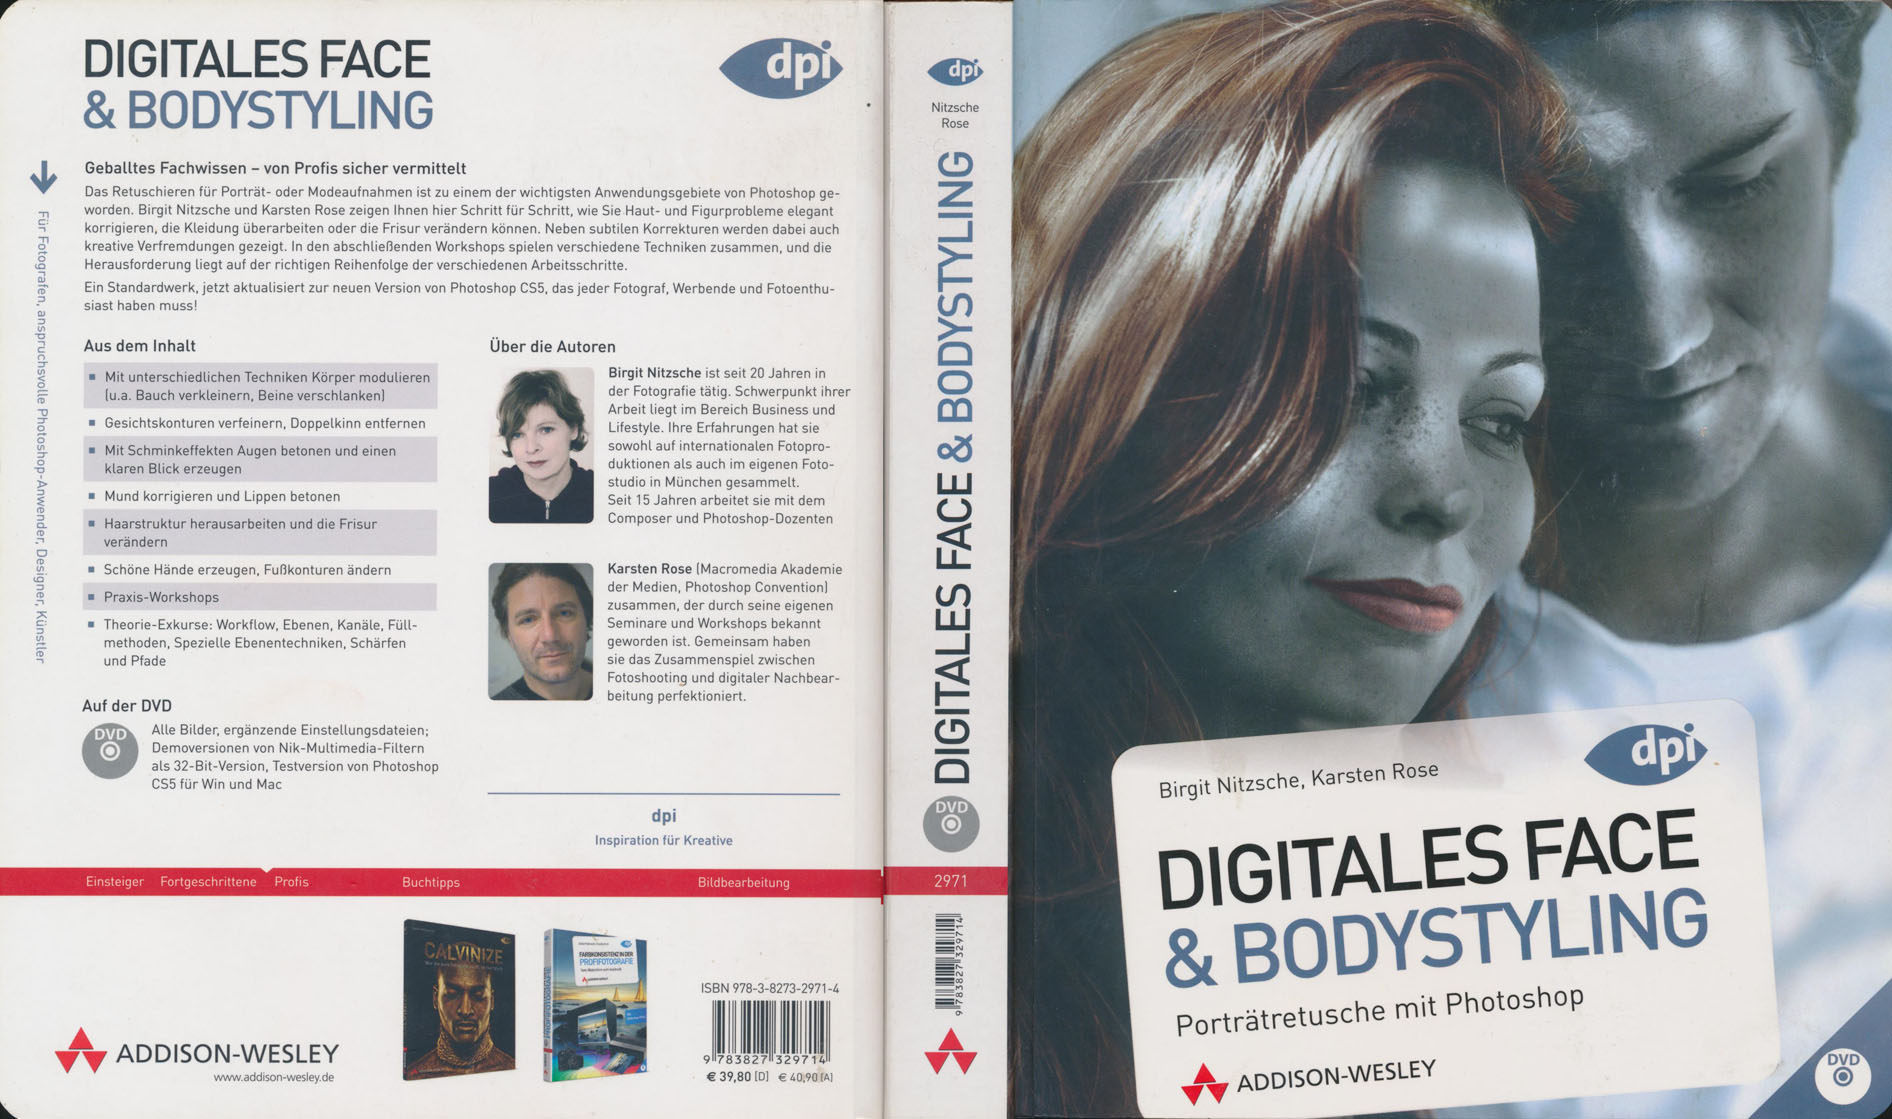 Digitales Face & Bodystyling